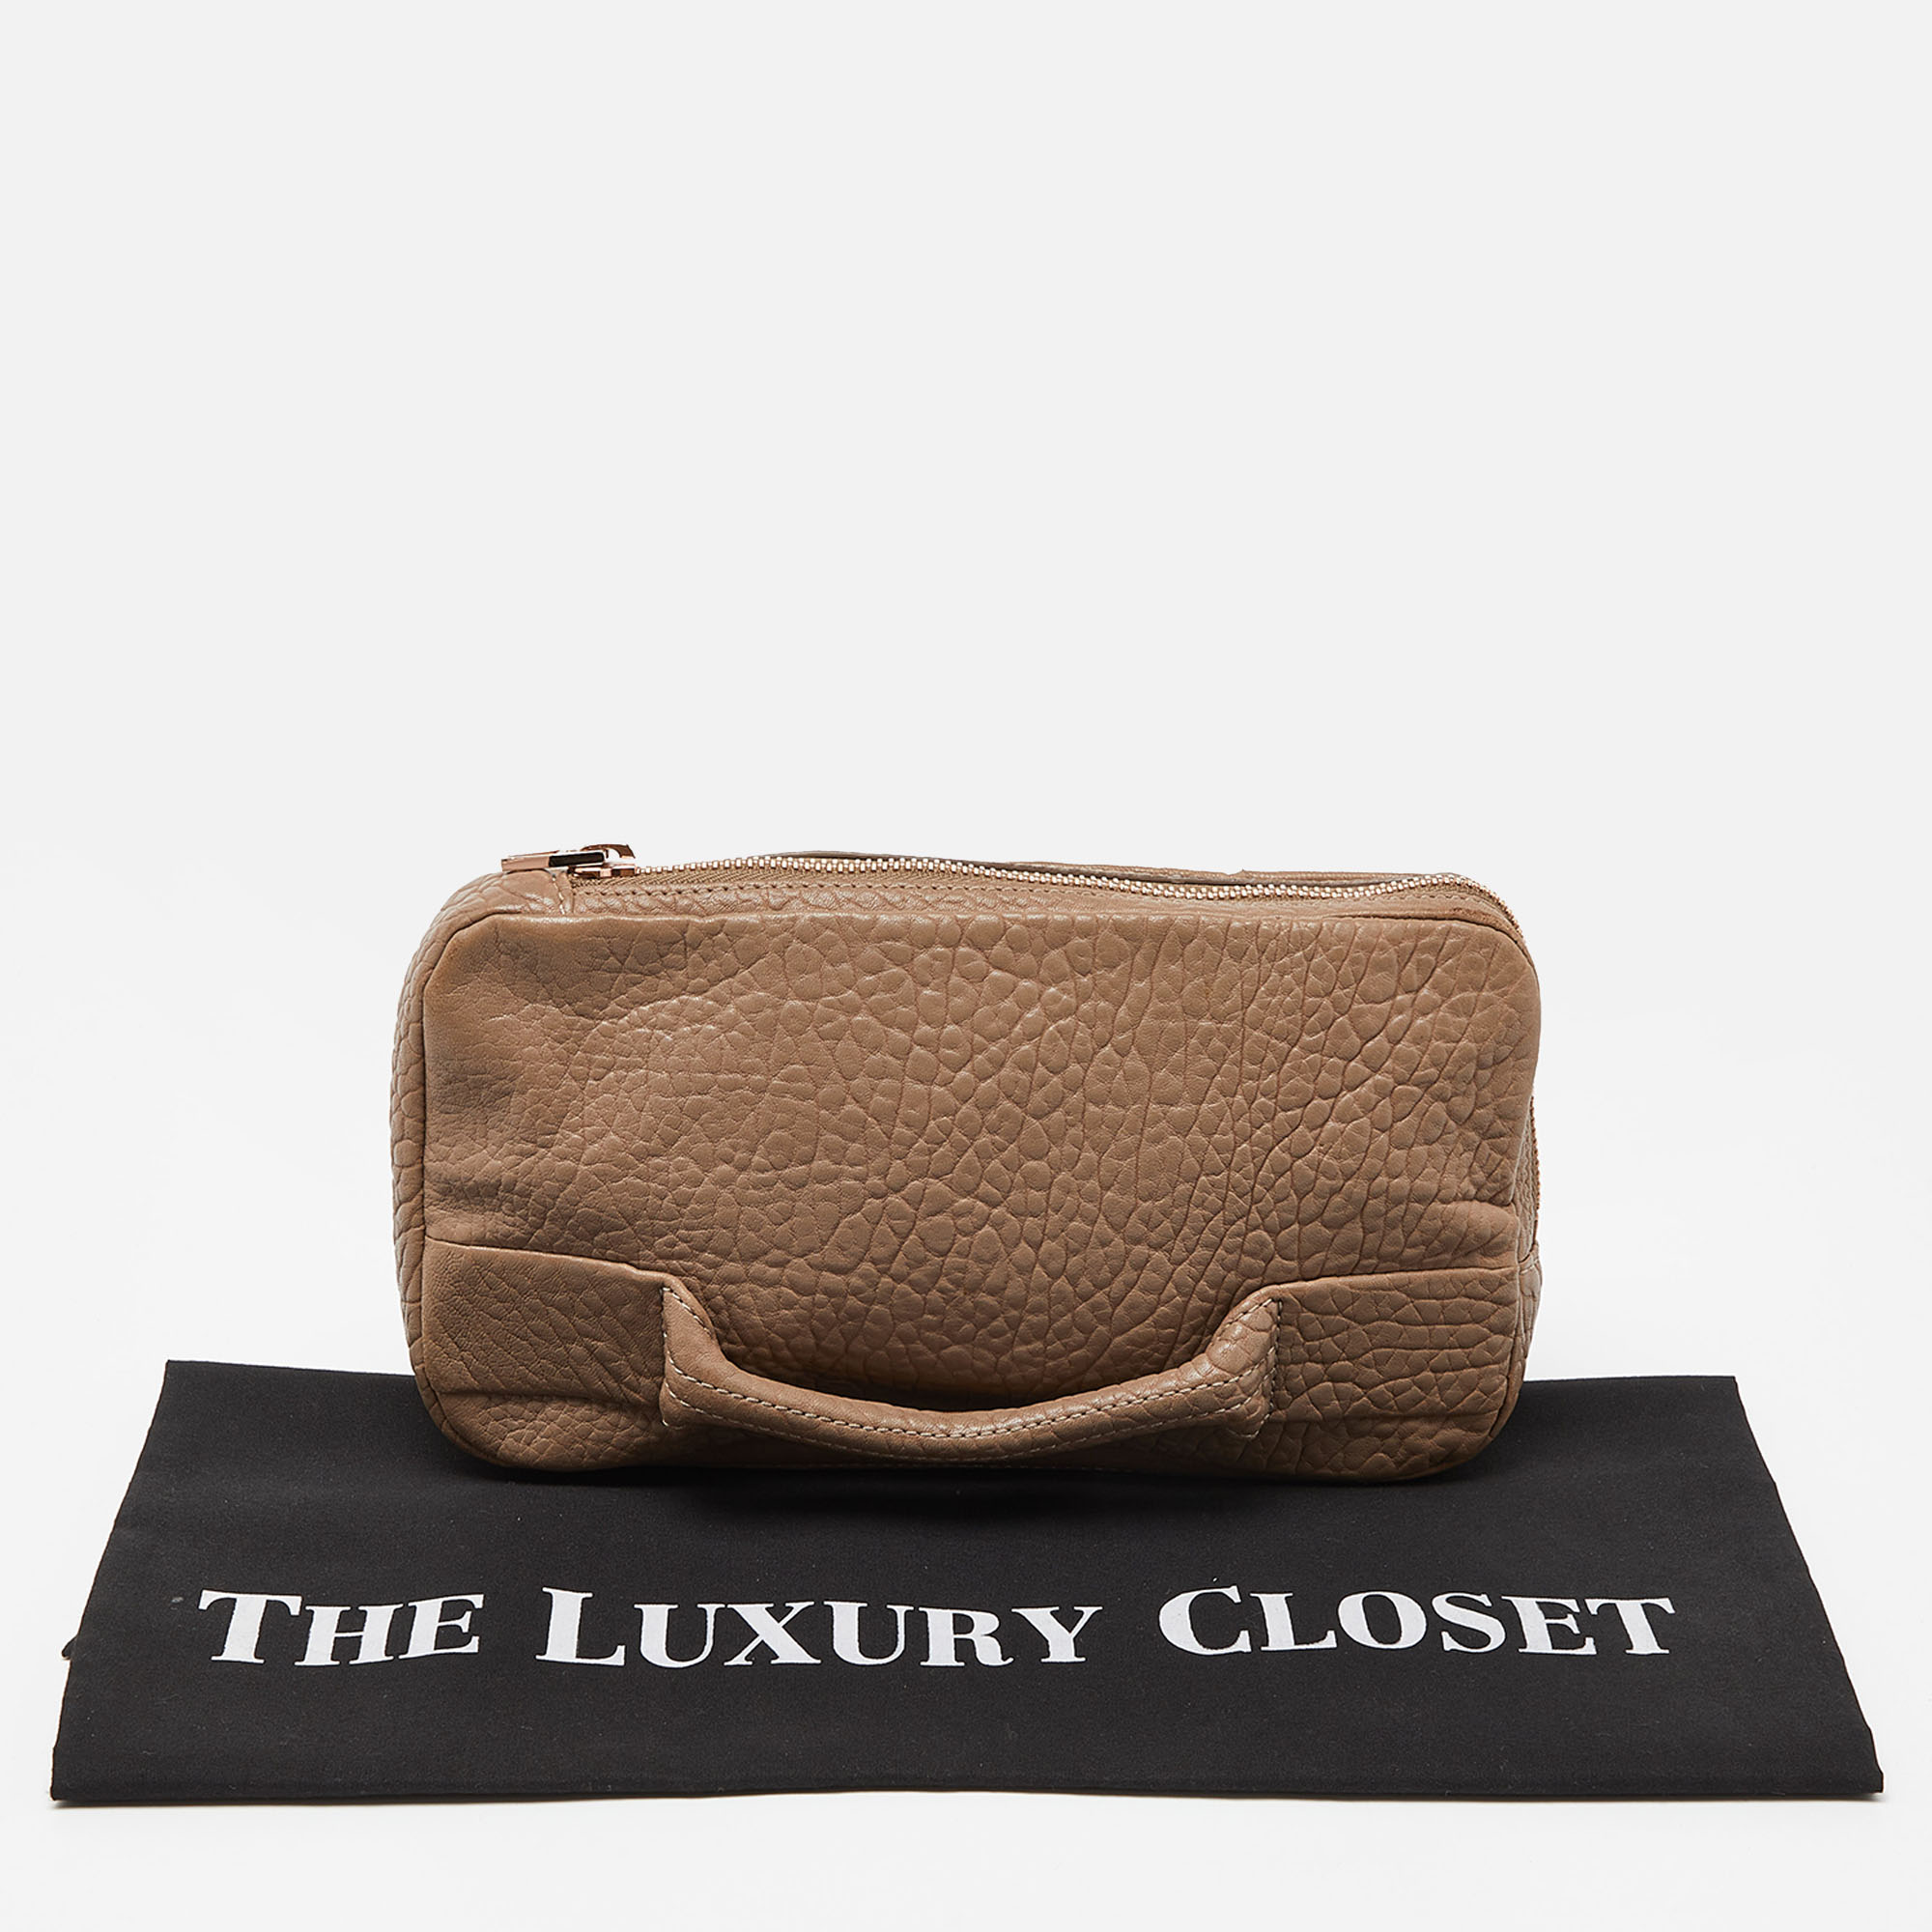 Alexander Wang Beige Leather Zipped Pouch